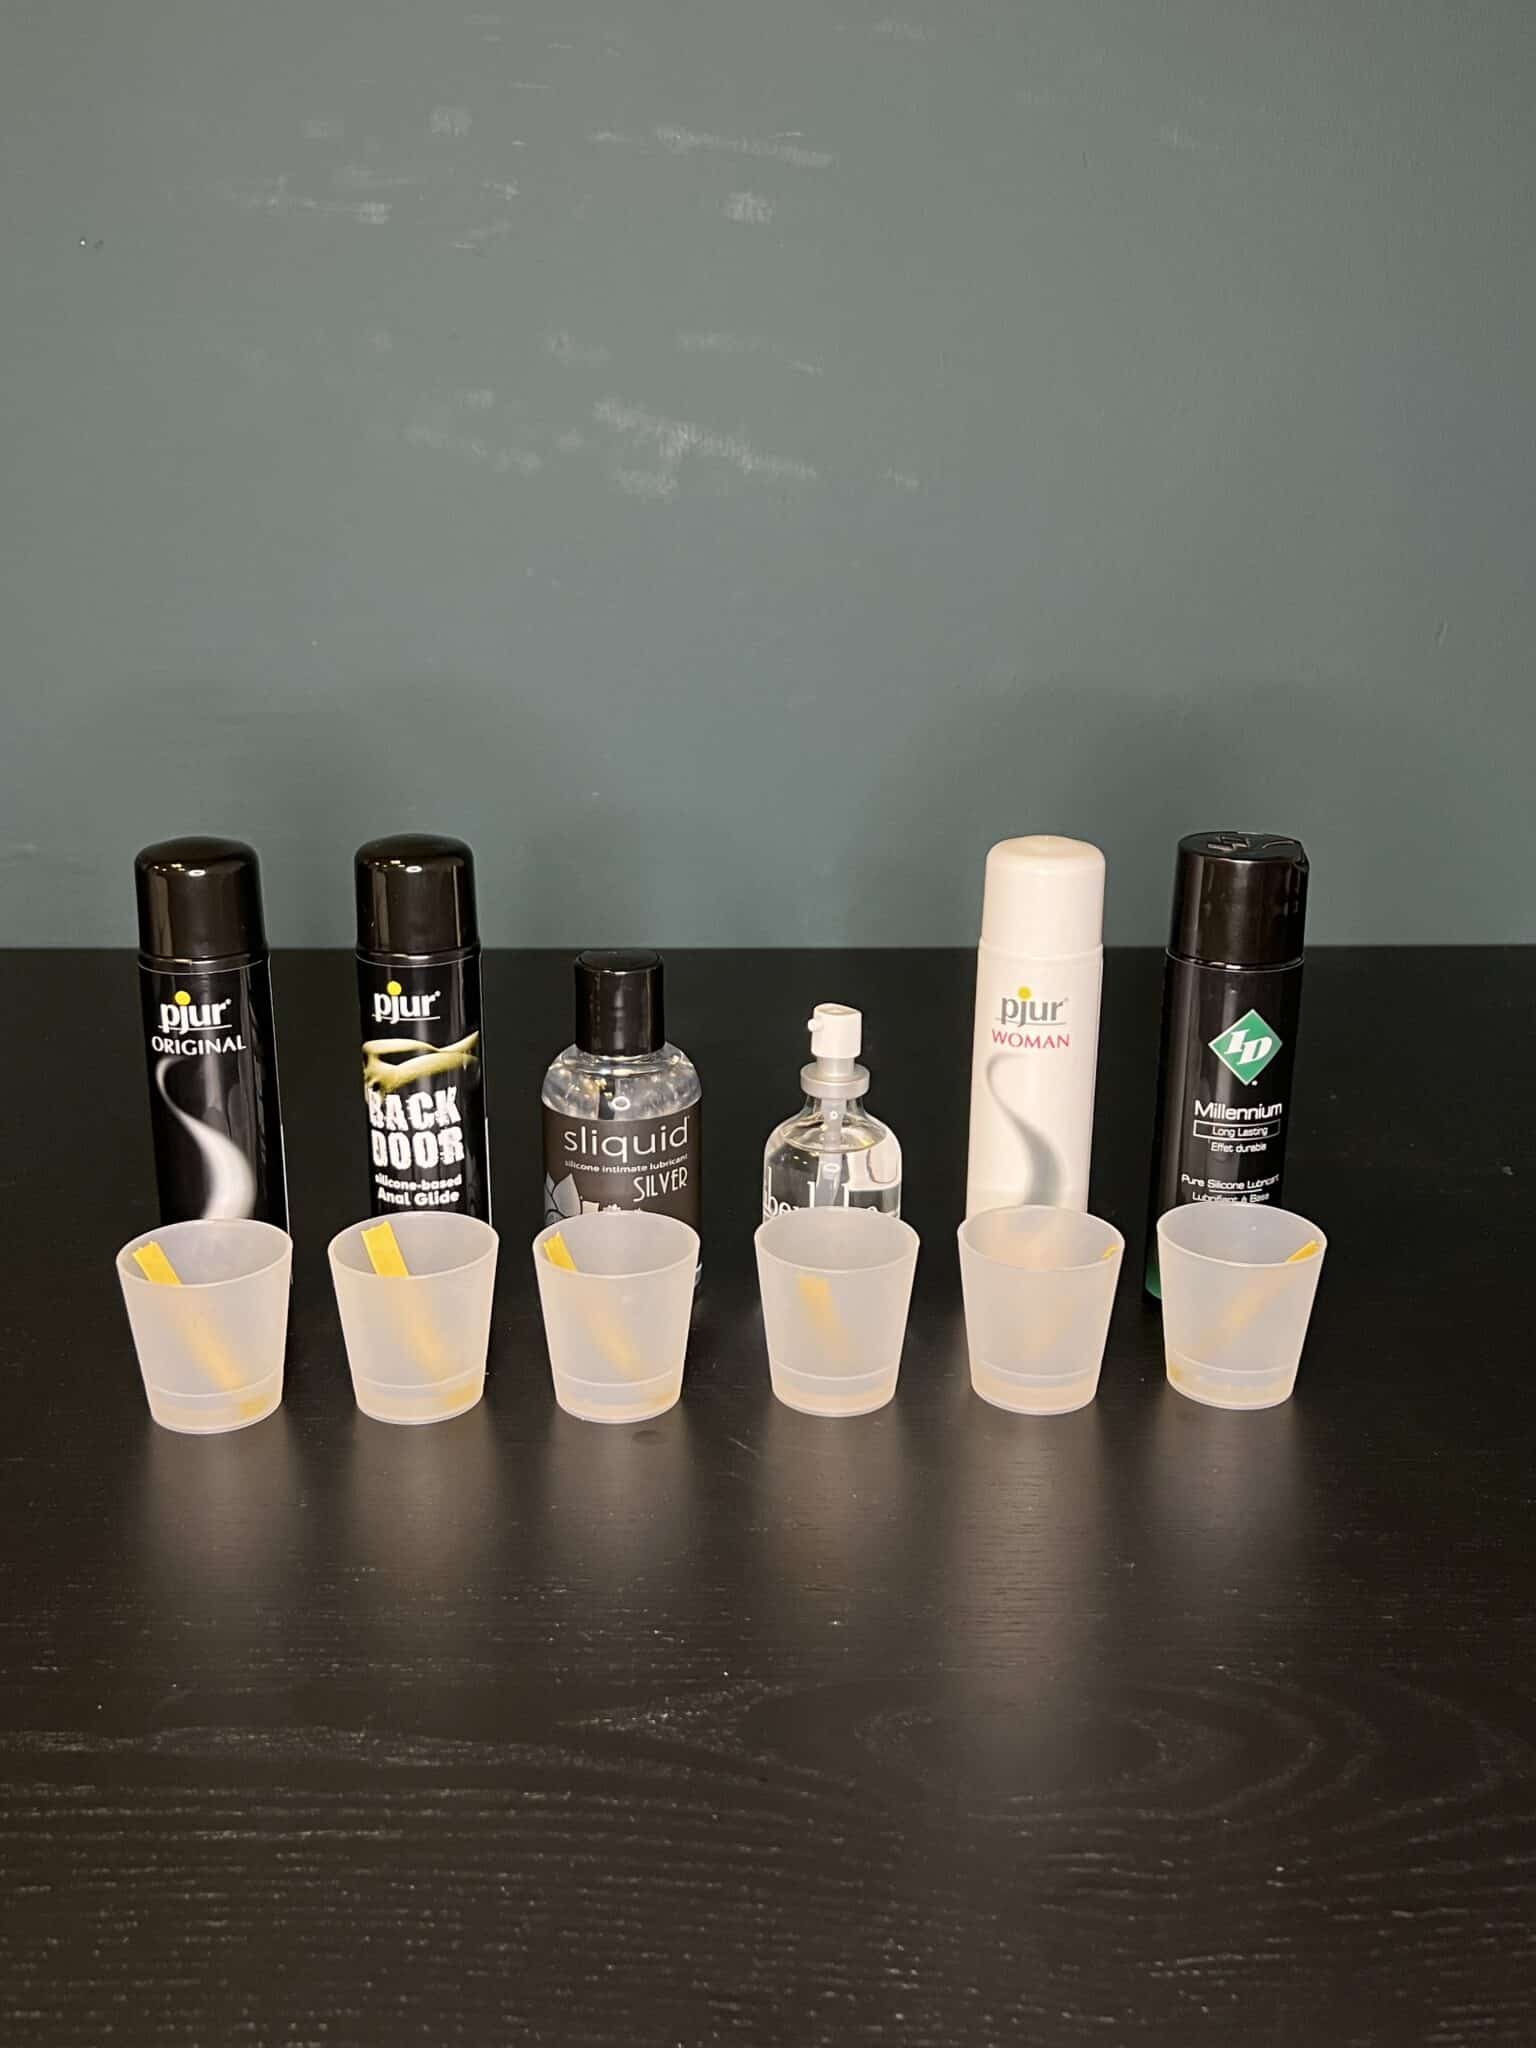 How were the Silicone Lubes tested?